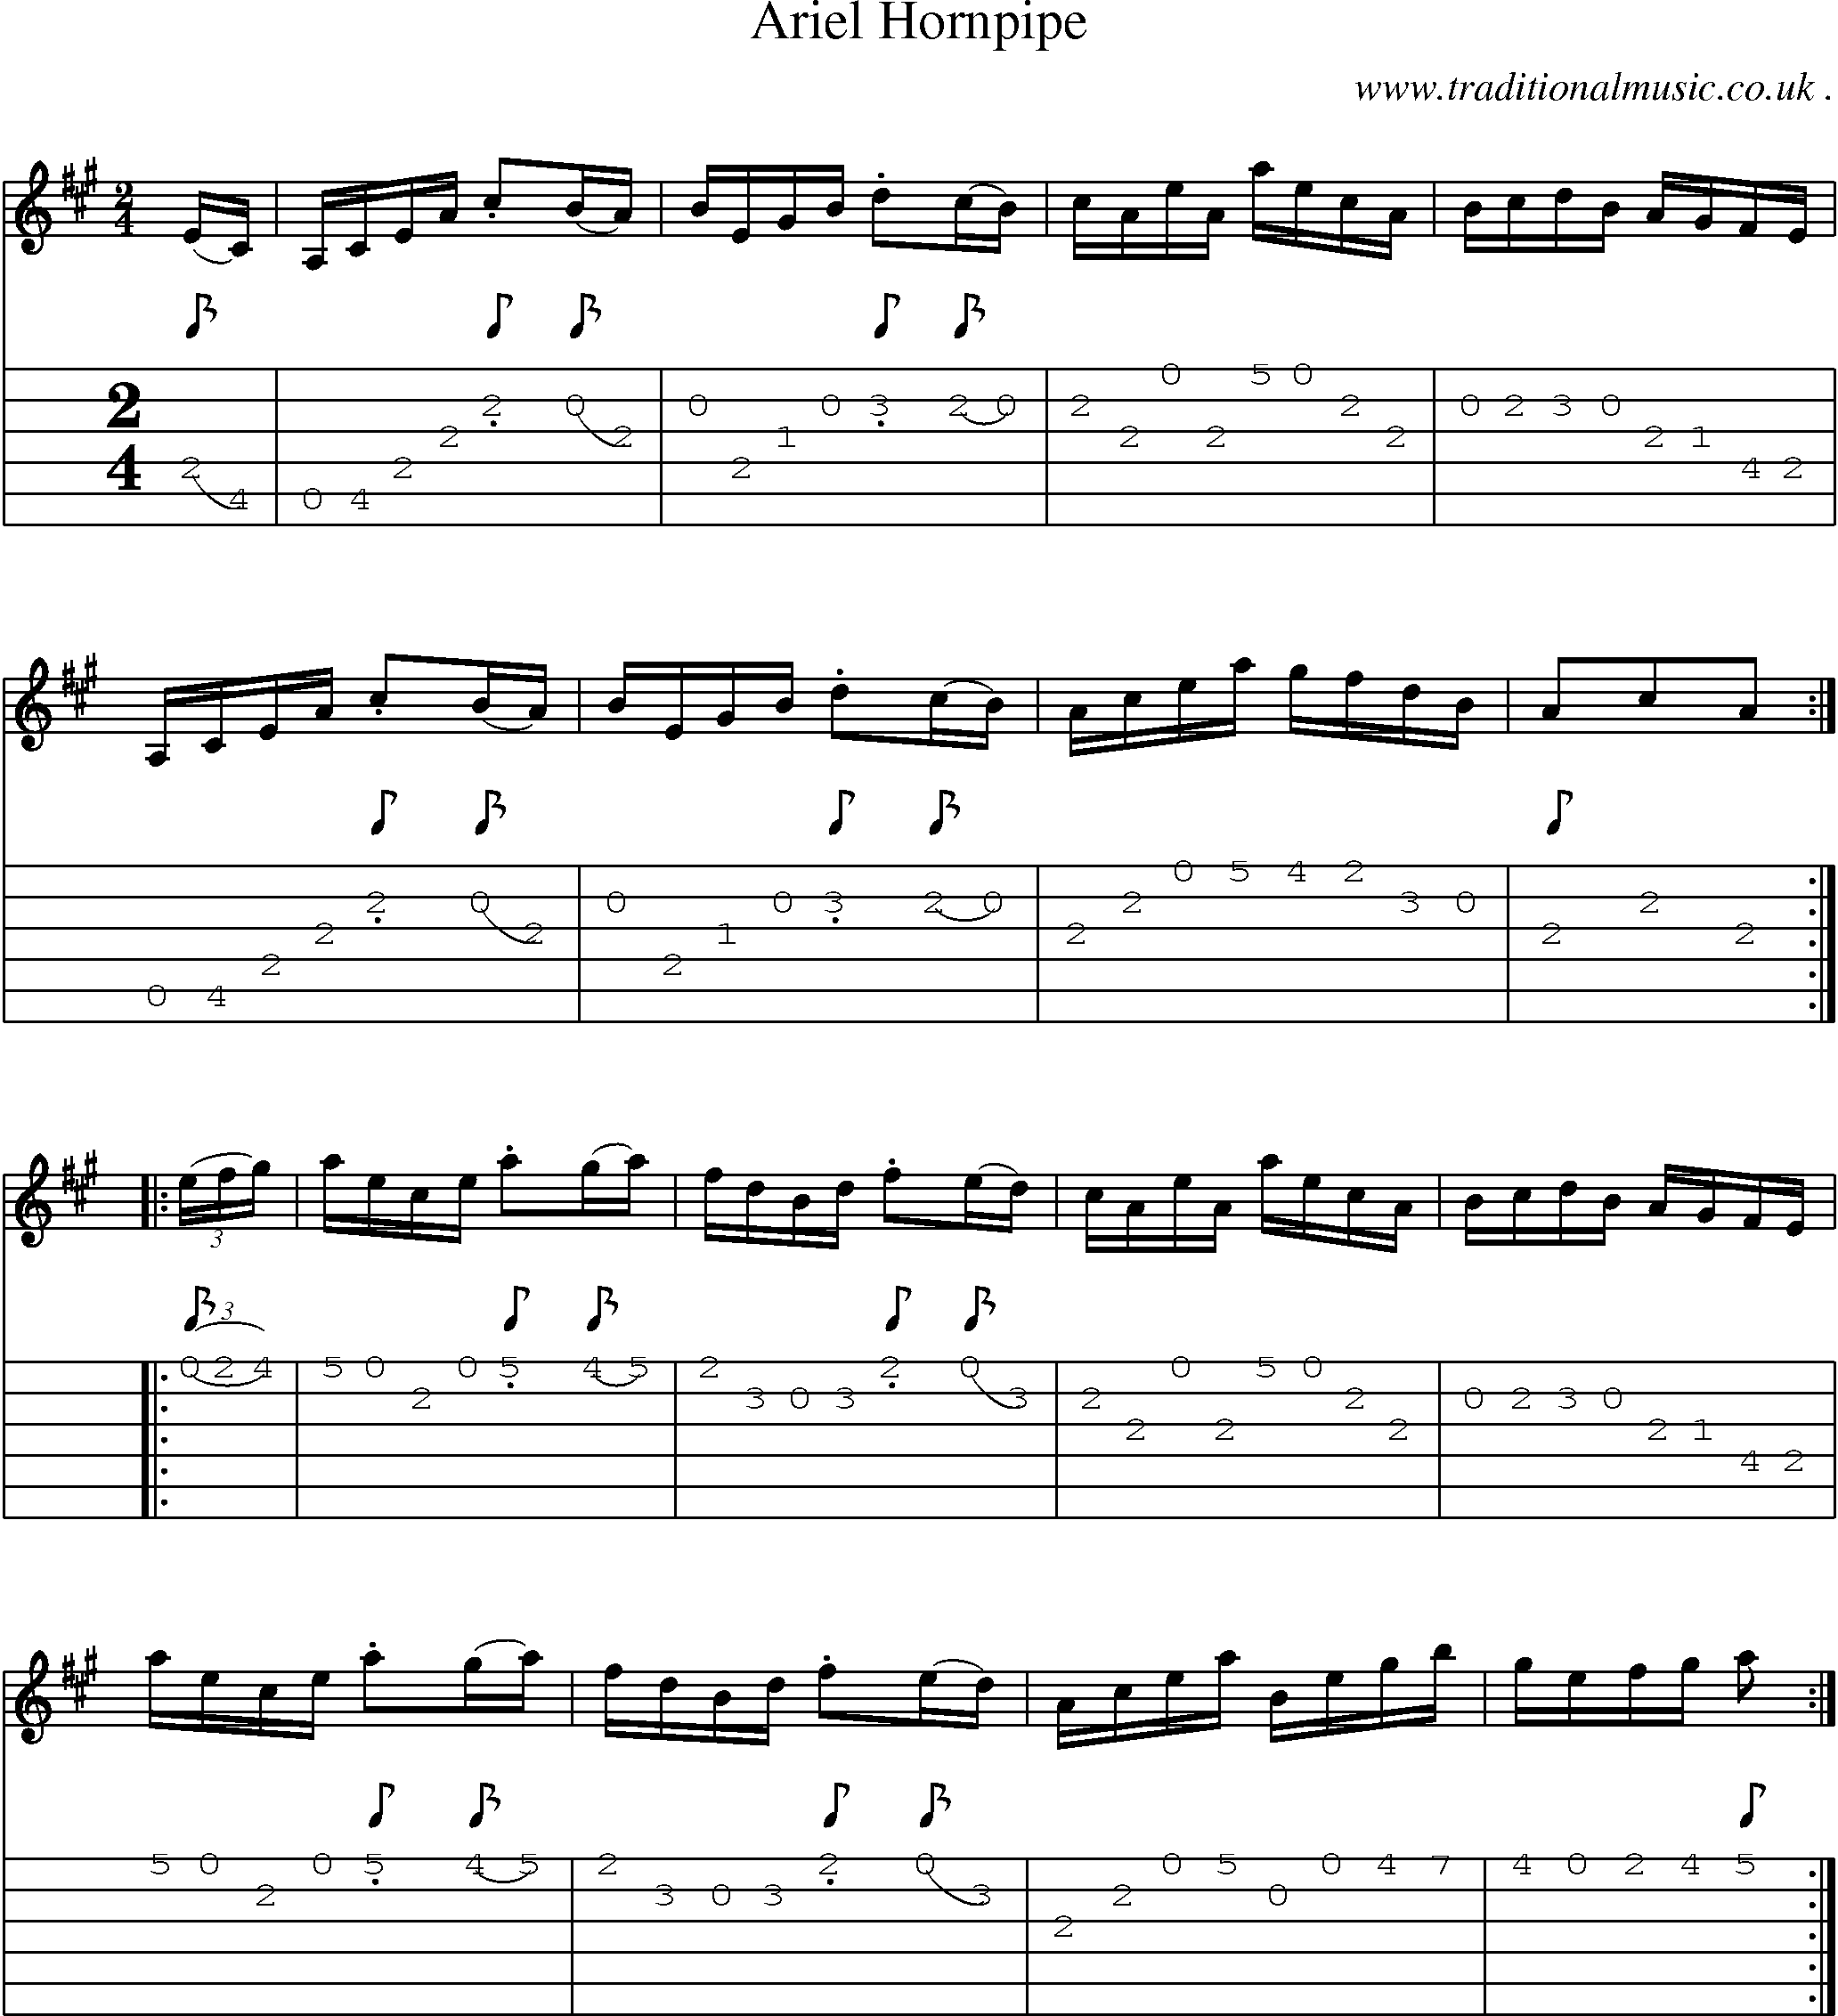 Sheet-Music and Guitar Tabs for Ariel Hornpipe